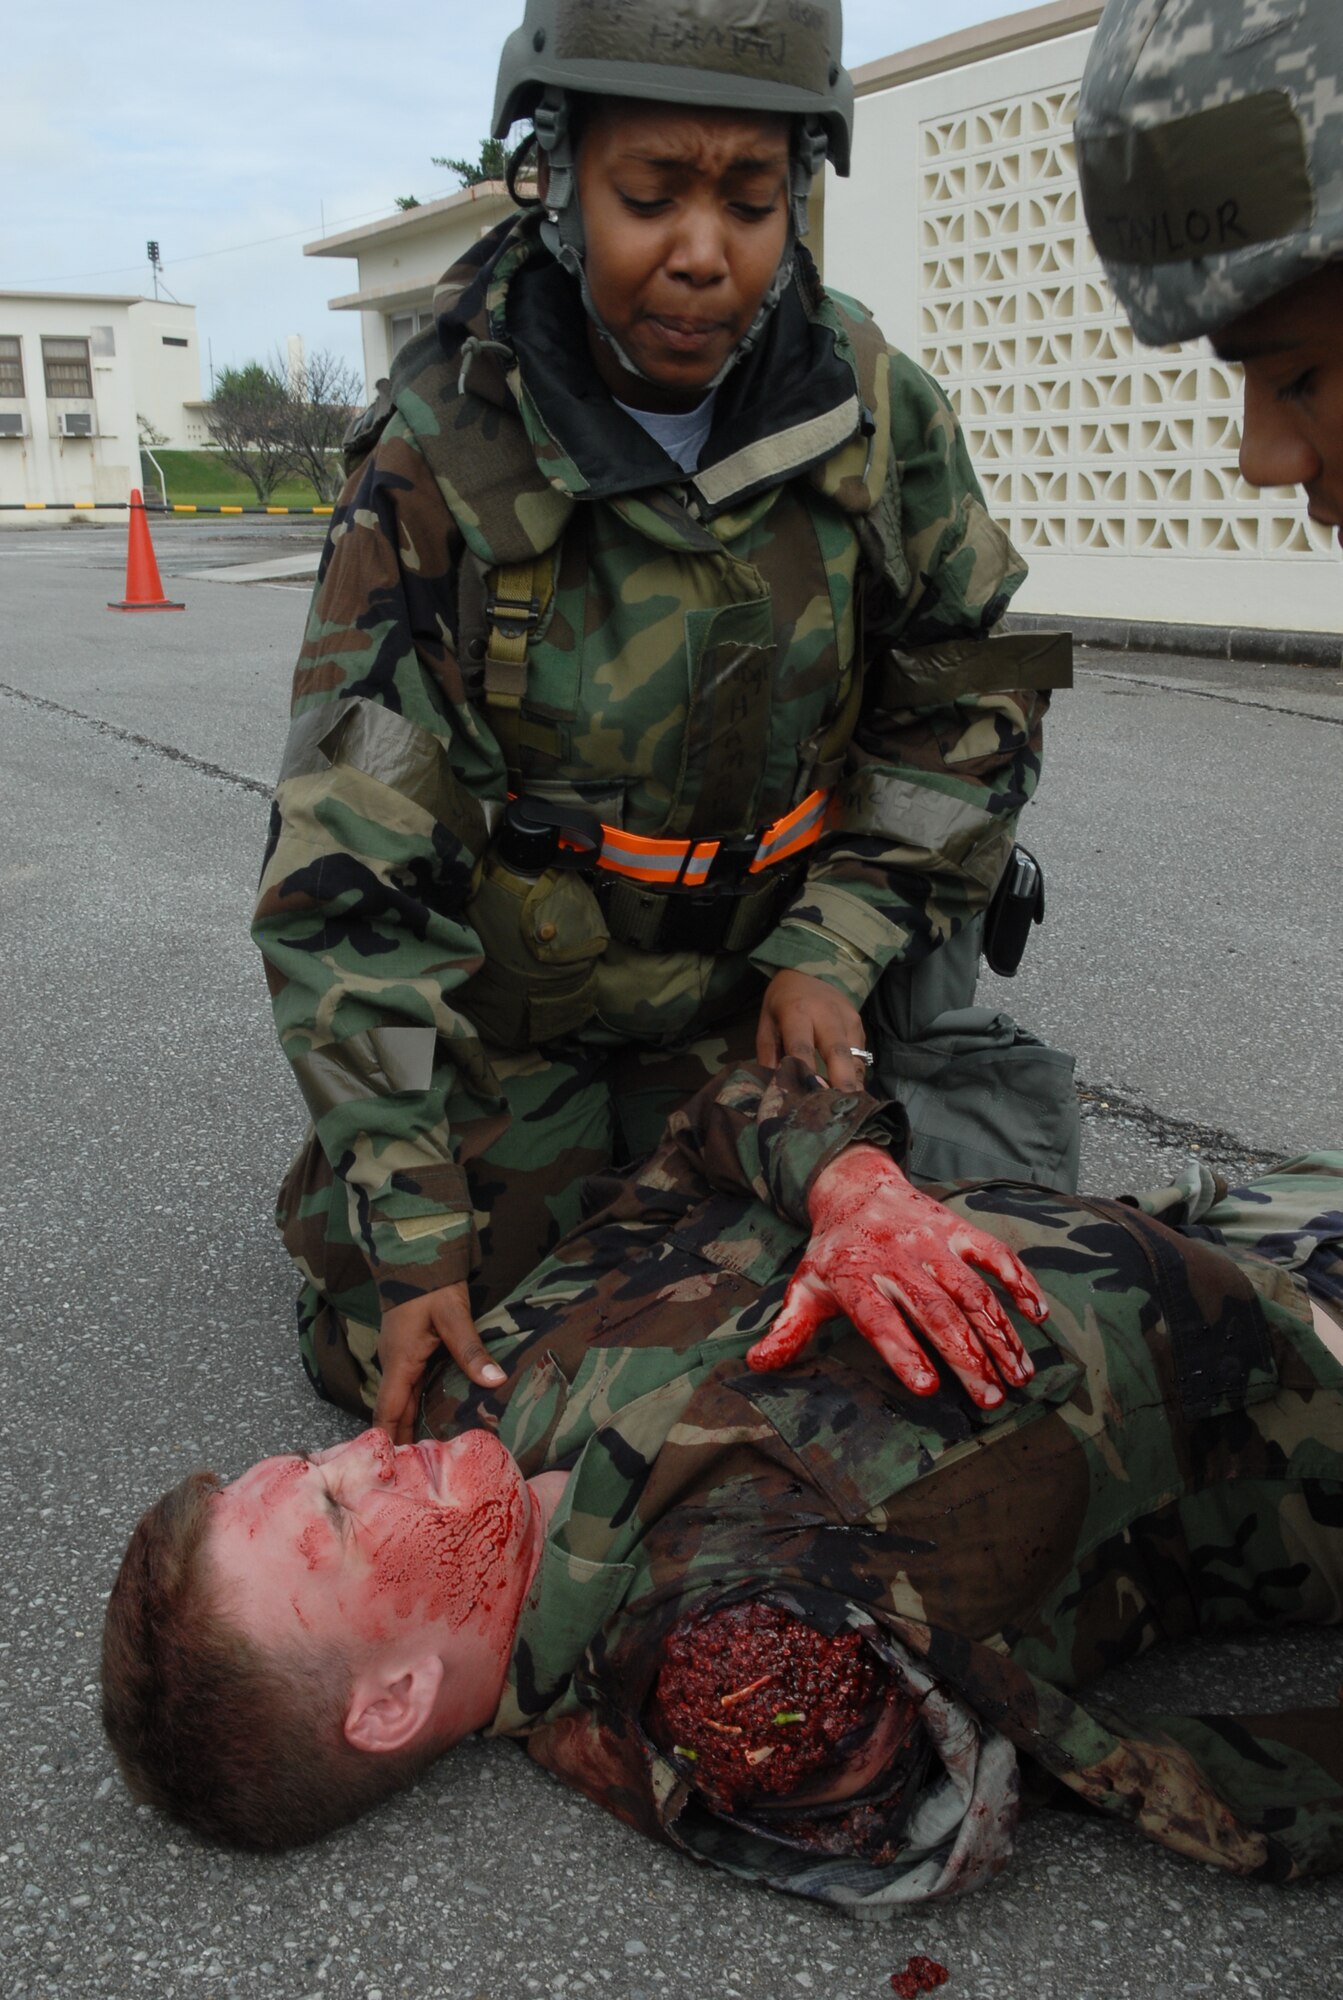 Master Sgt. Felisha Haman, 18th Communication Squadron first sergeant, provides first aid care to Airman 1st Class Nickolaus Miller from the 33rd Aircraft Maintenance Unit in a simulation during the local operational readiness exercise at Kadena Air Base Oct. 22. (U.S. Air Force photo / Junko Kinjo)